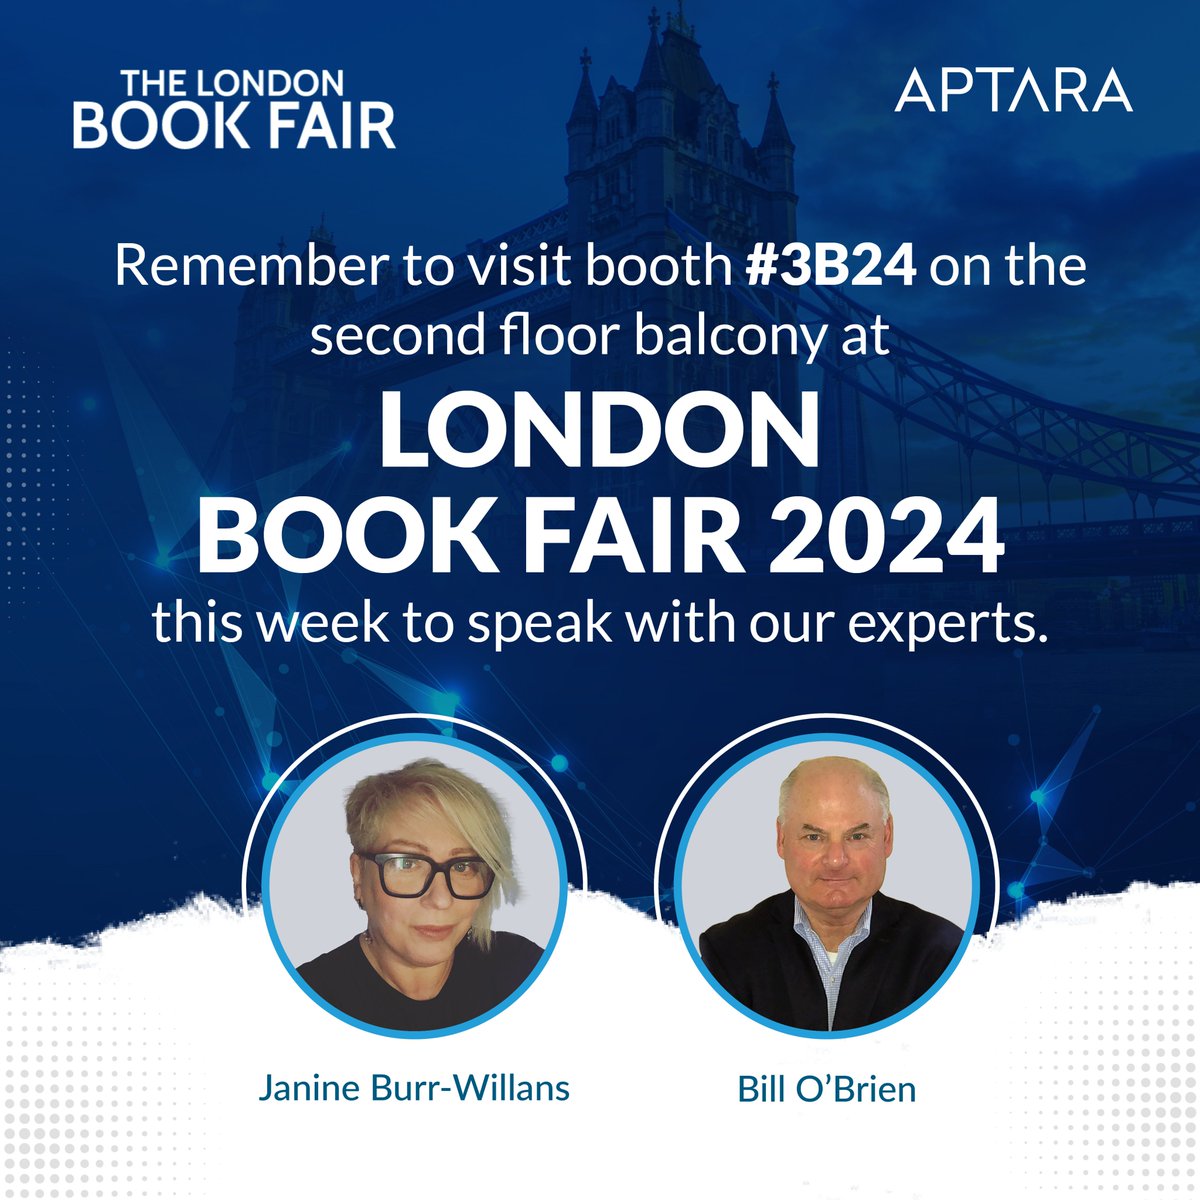 Don't miss the chance to connect with industry experts Janine Burr-Willans and Bill O'Brien. 

#Aptara #londonbookfair #lbf2024 #innovationinpublishing #publishingexperts #bookindustryevent #meettheexperts #publishinginnovation #publishingsolutions #PublishingTech